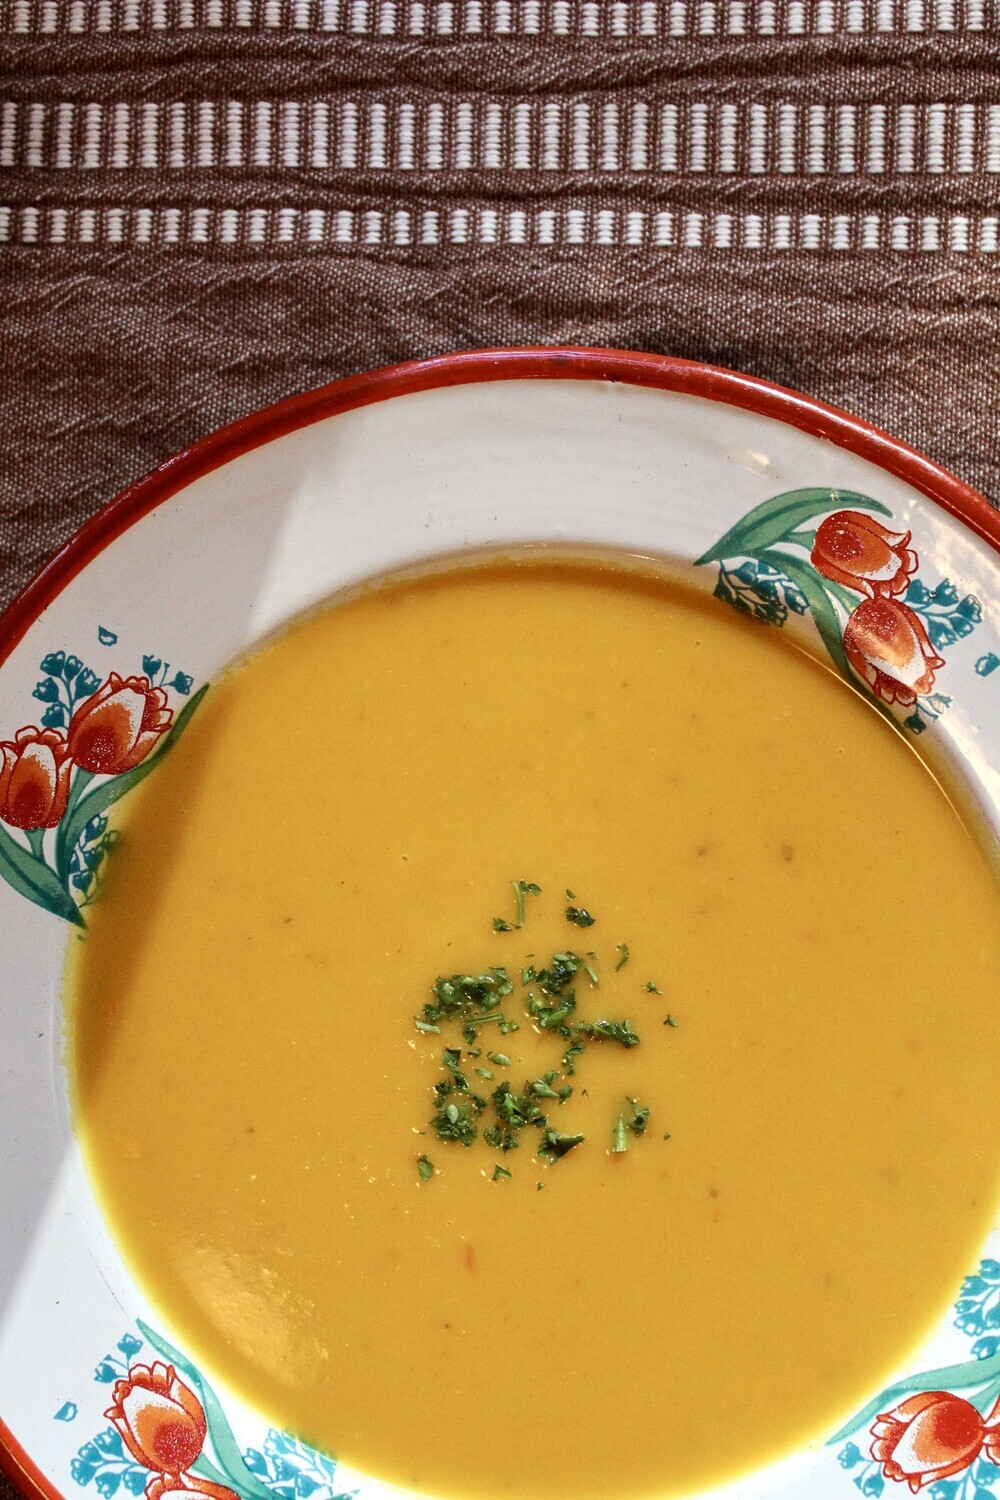 Soups by Marigold Kitchen